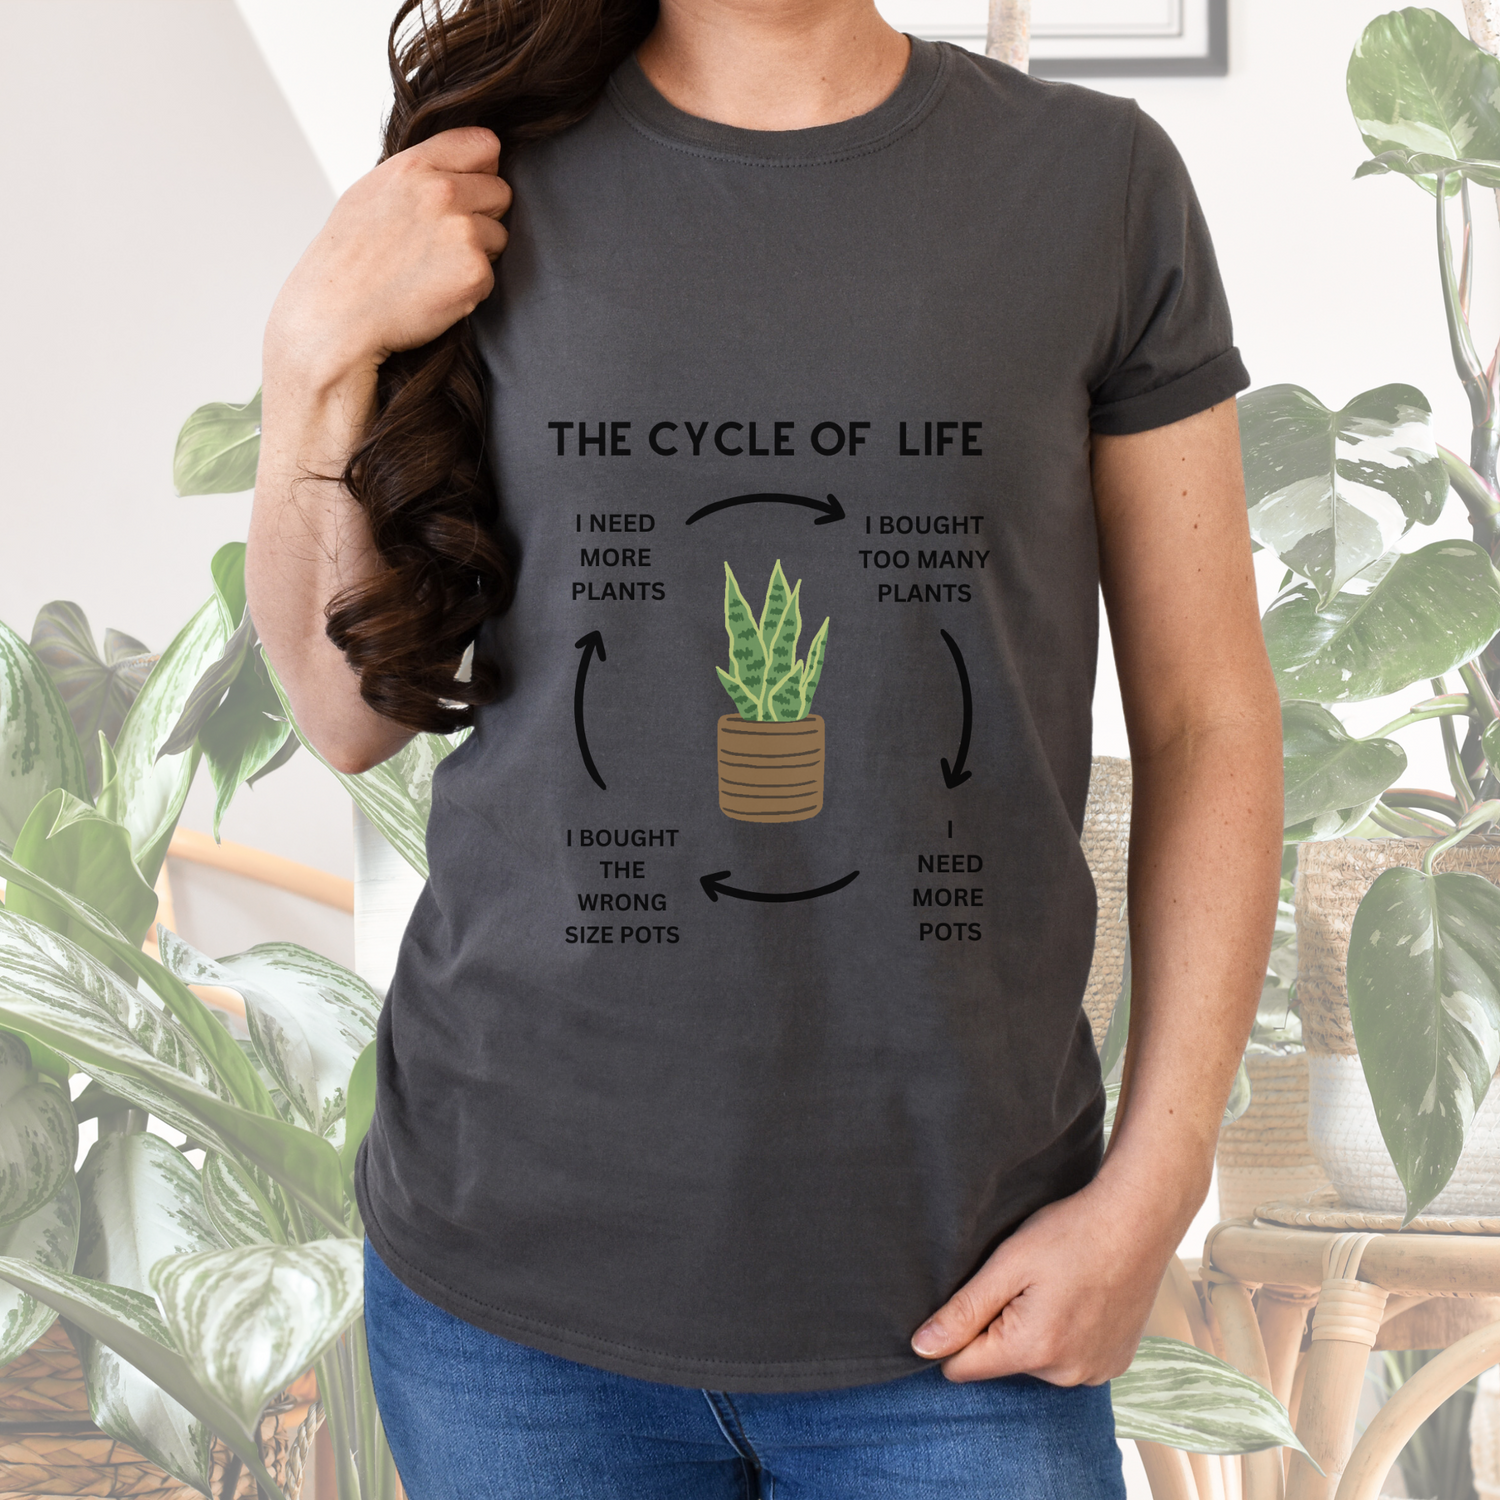 Plant lover tee